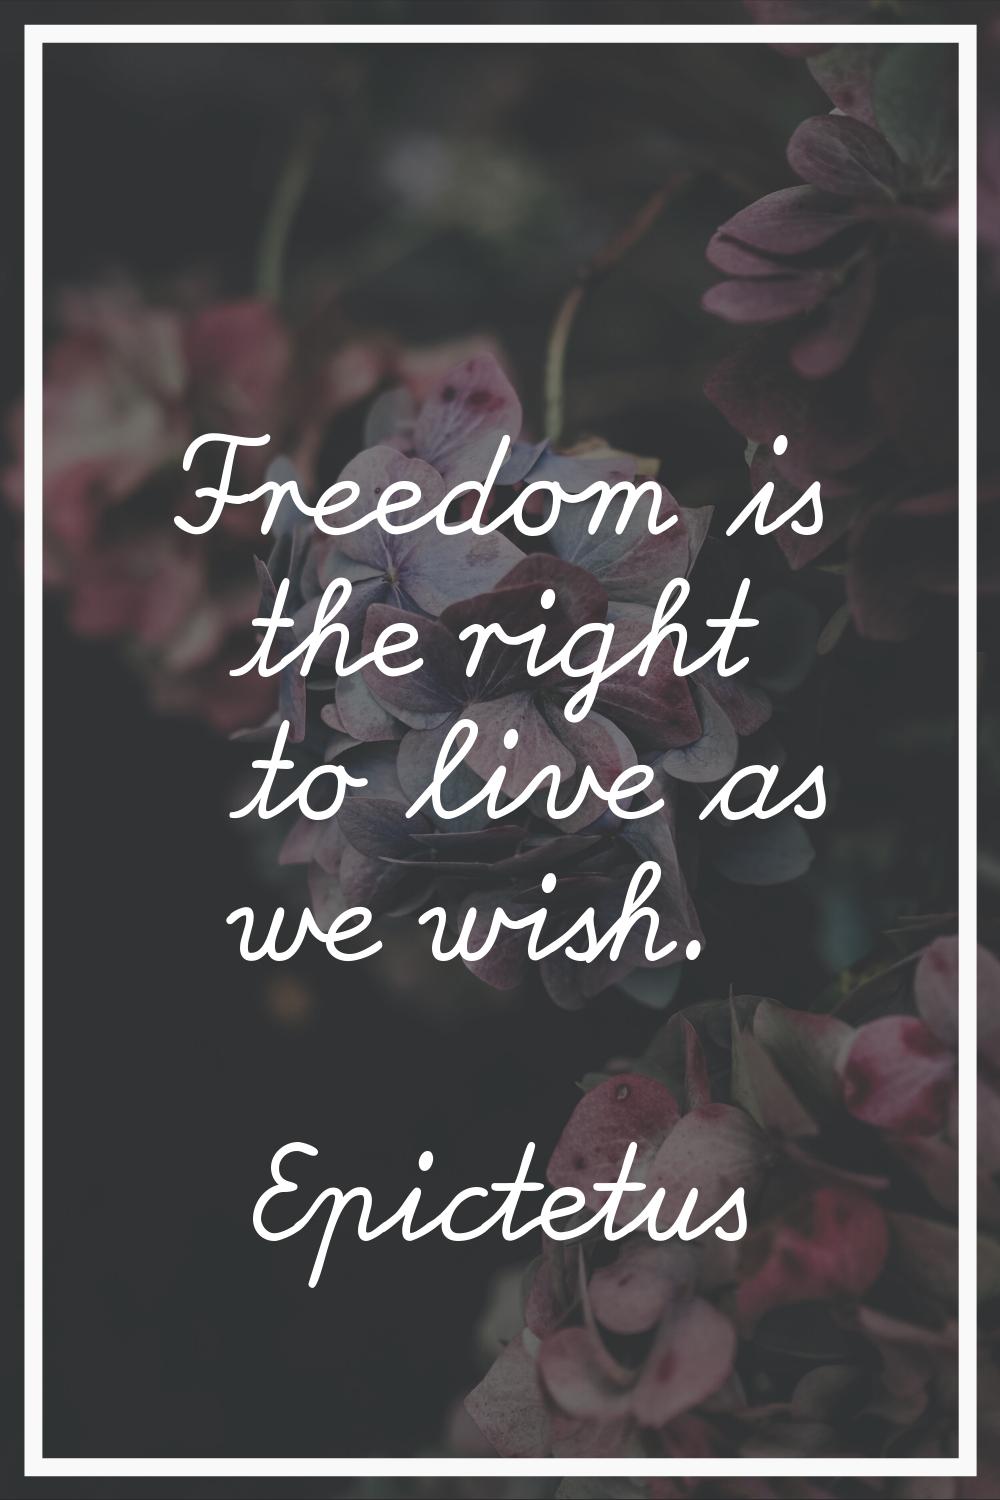 Freedom is the right to live as we wish.